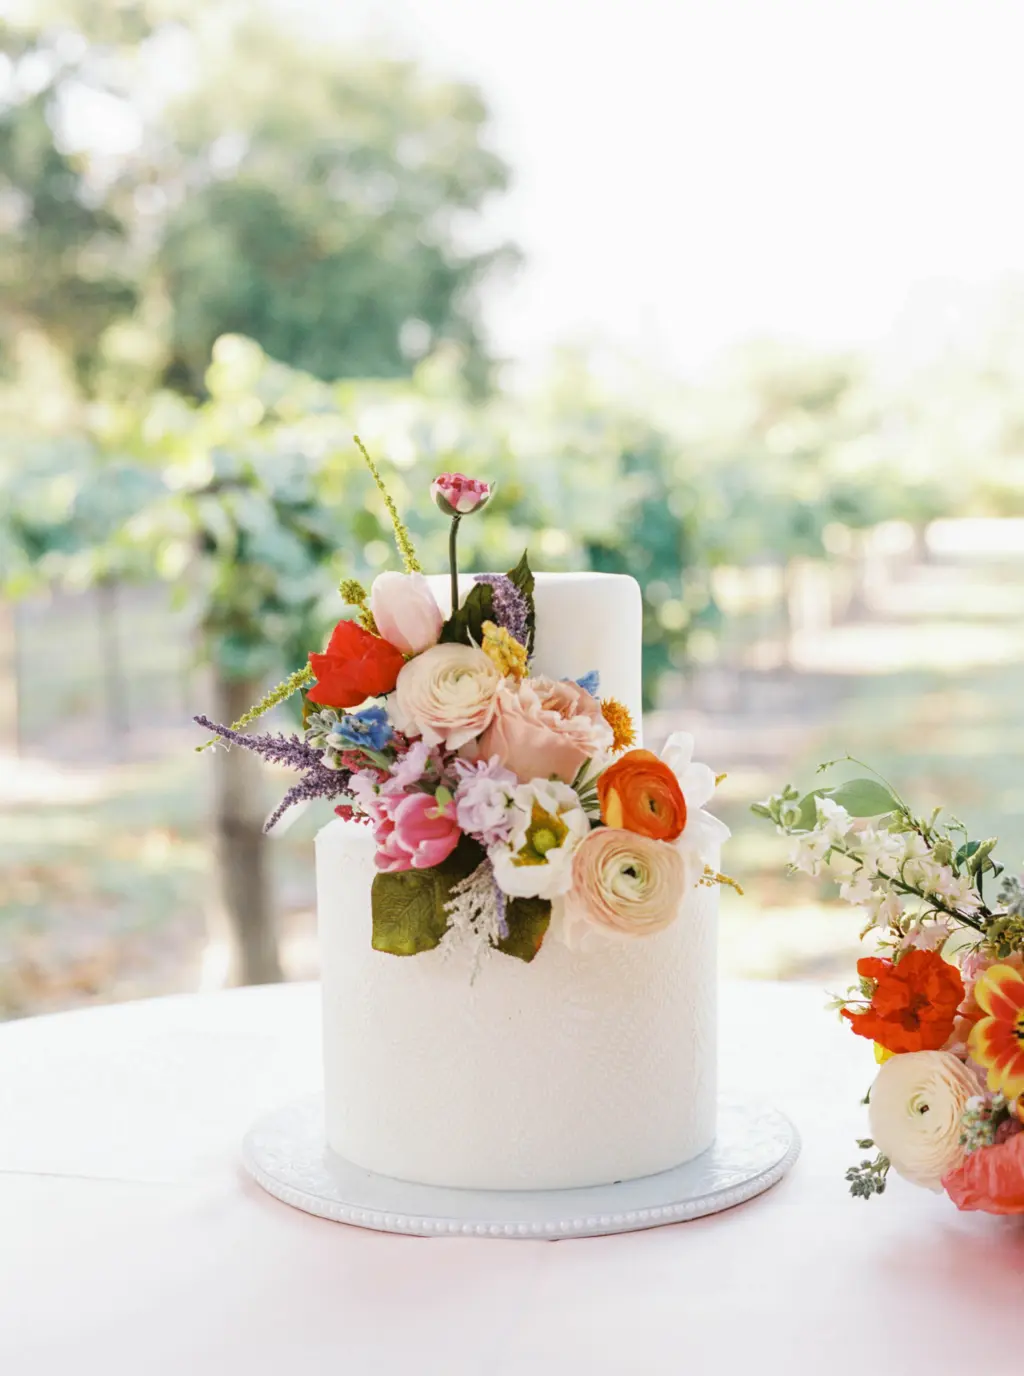 Round Two-Tiered White Textured Wedding Cake with Colorful Flower Accents | Wedding Reception Dessert Table Ideas | Tampa Bay Florist Save The Date Florida